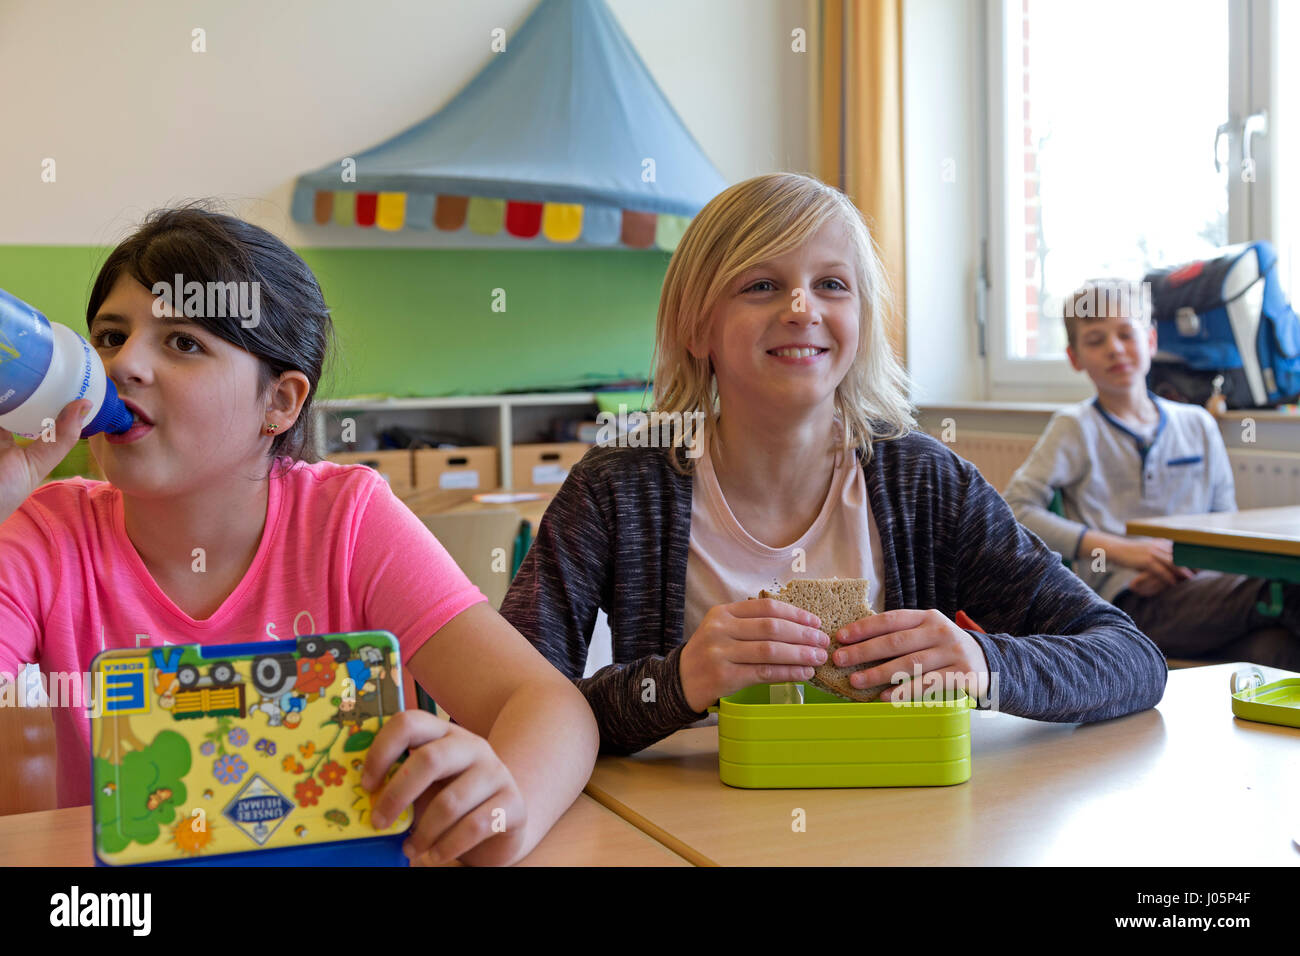 pupils at primary school eating their breakfast, Lower Saxony, Germany Stock Photo